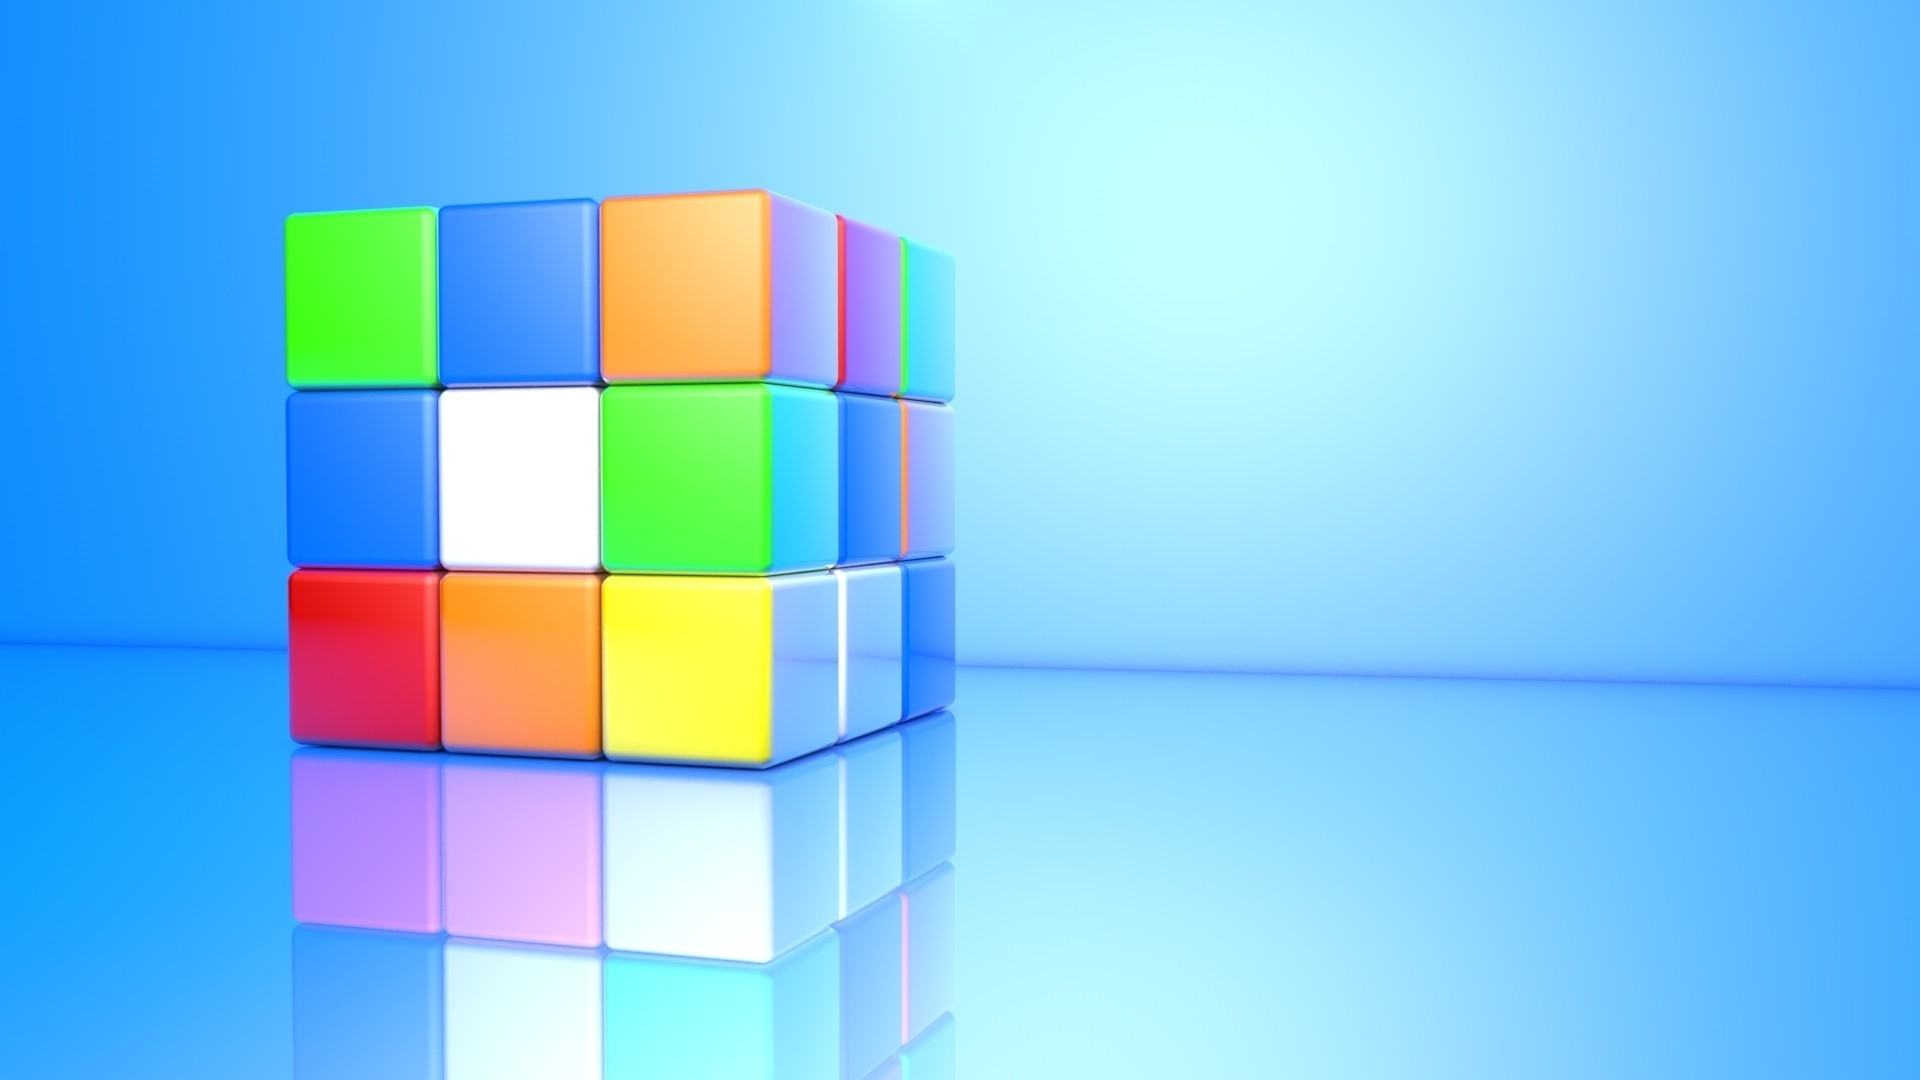 1920x1080 Wallpaper : Rubiks Cube, colorful, face, cube goodfon 1050864 HD Wallpapers